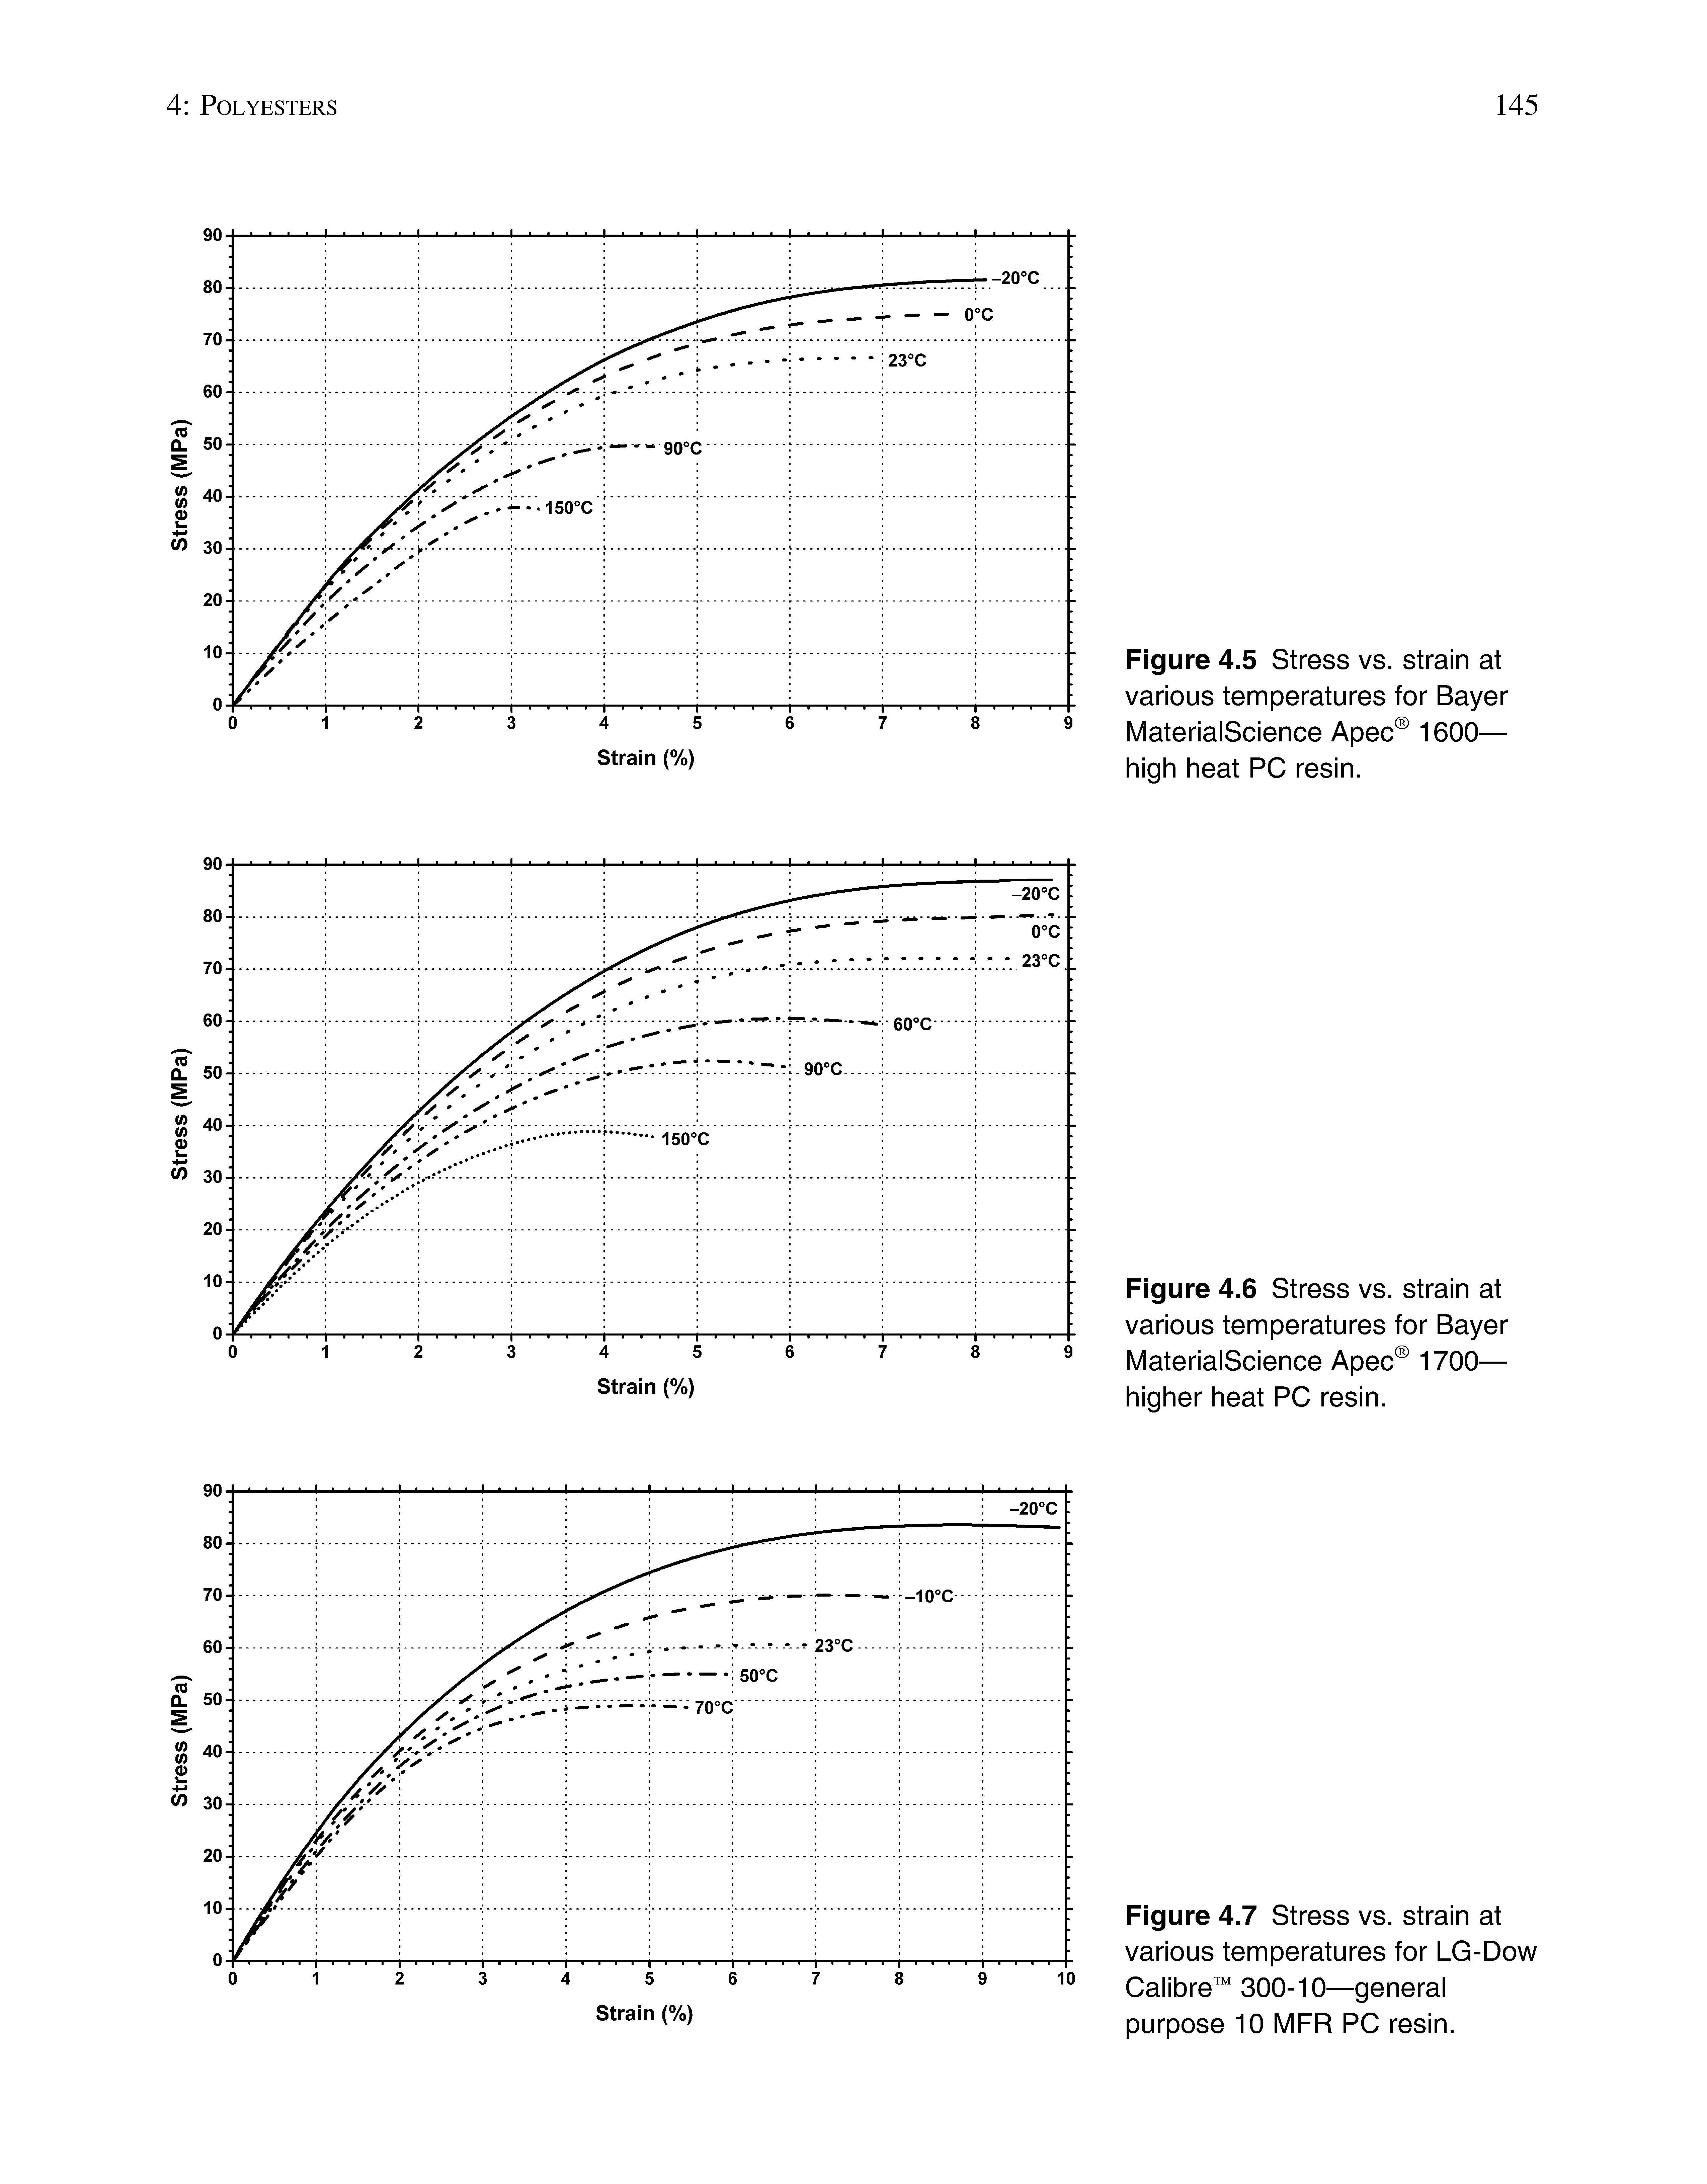 Figure 4.5 Stress vs. strain at various temperatures for Bayer MaterialScience Apec 1600— high heat PC resin.